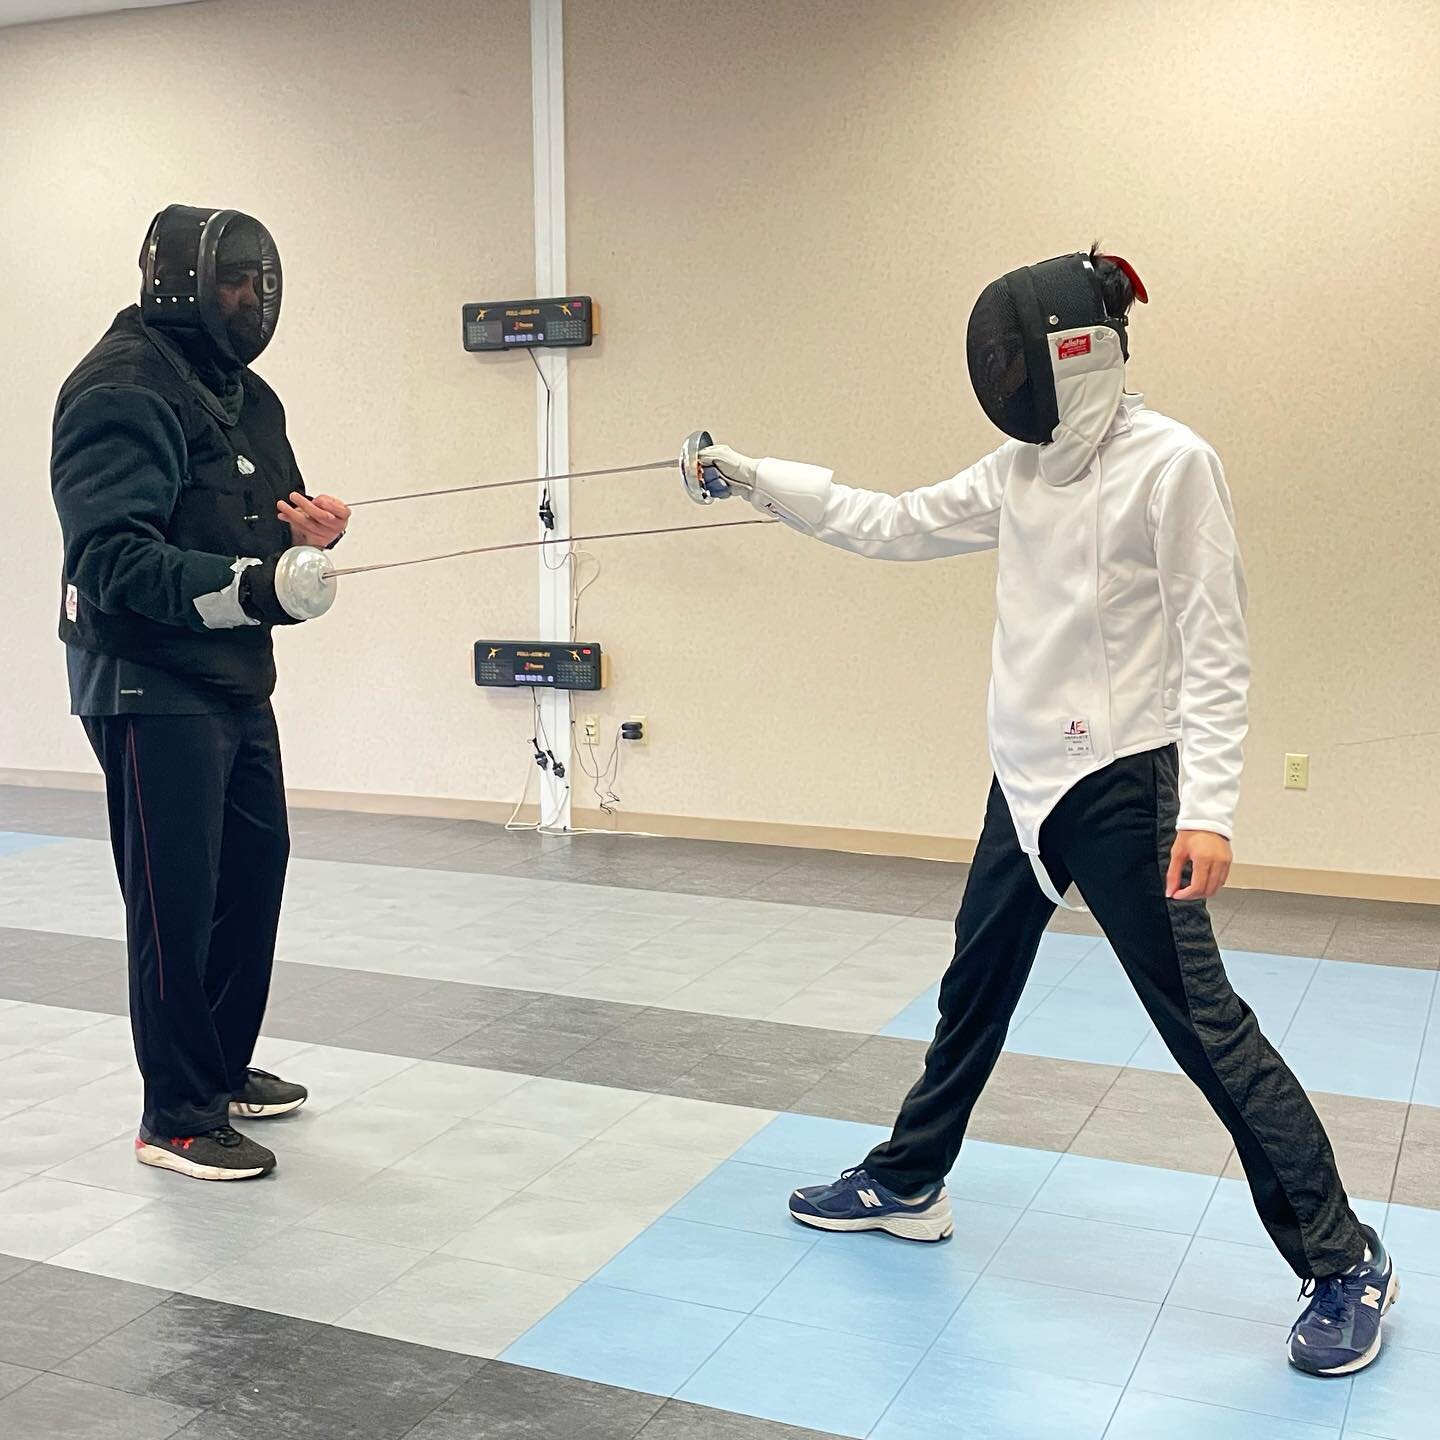 Our saber, epee and foil coaches are busy tonight! 
.
.
. 
.
.
.
. 

#manchenfencing  #sport #athlete #fencing #duel #sportphotography #fencingmask #training #fencingblade #coaching #fencingclub #saberfencing #foilfencing #epeefencing #usafencing #us